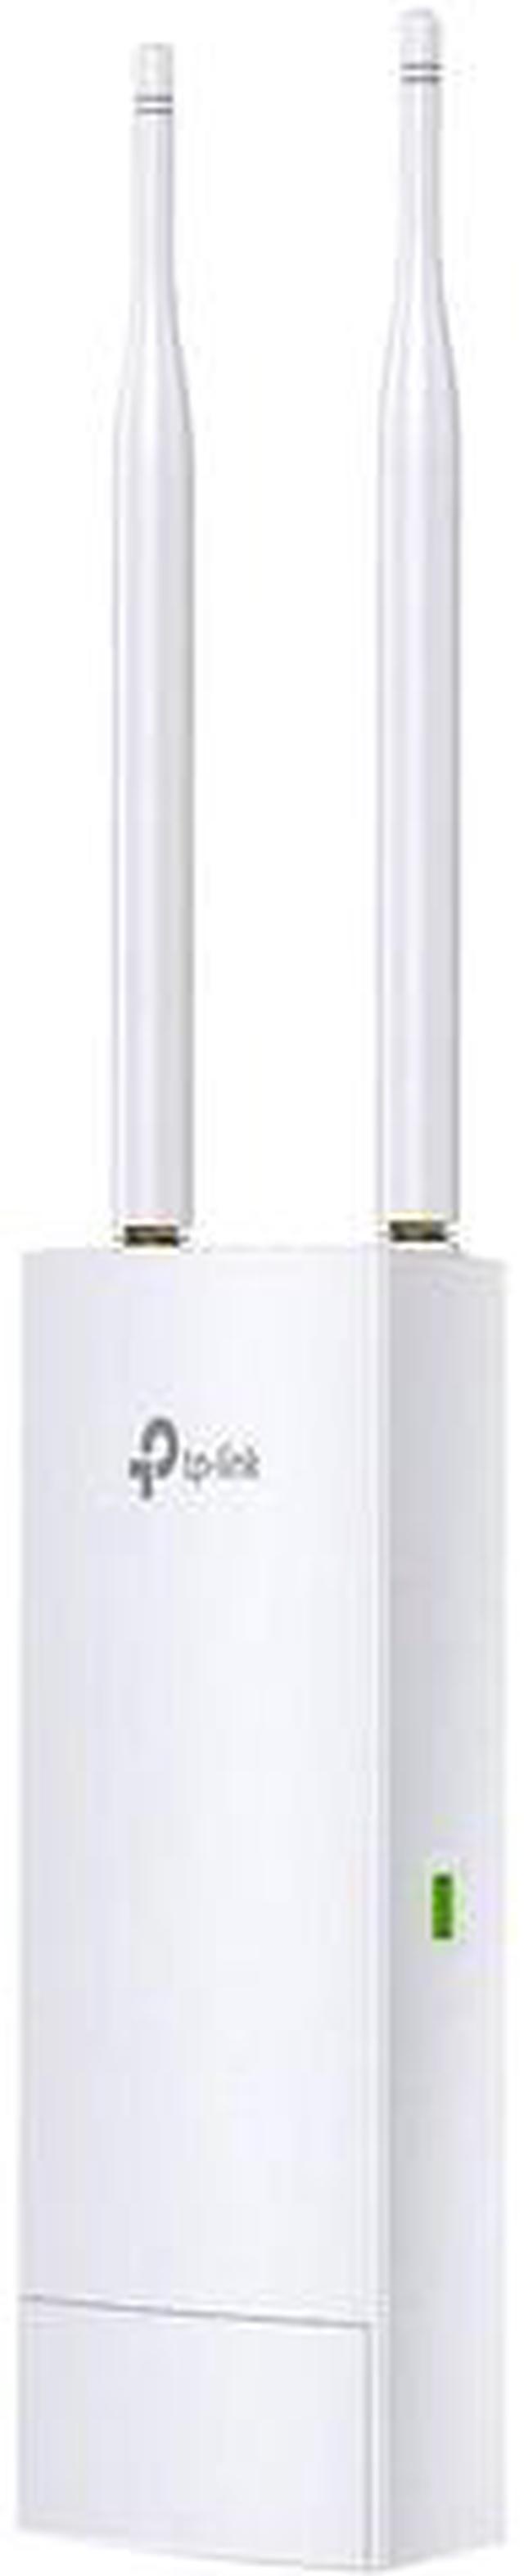 TP-Link EAP110 N300 Access N Outdoor Wireless Point